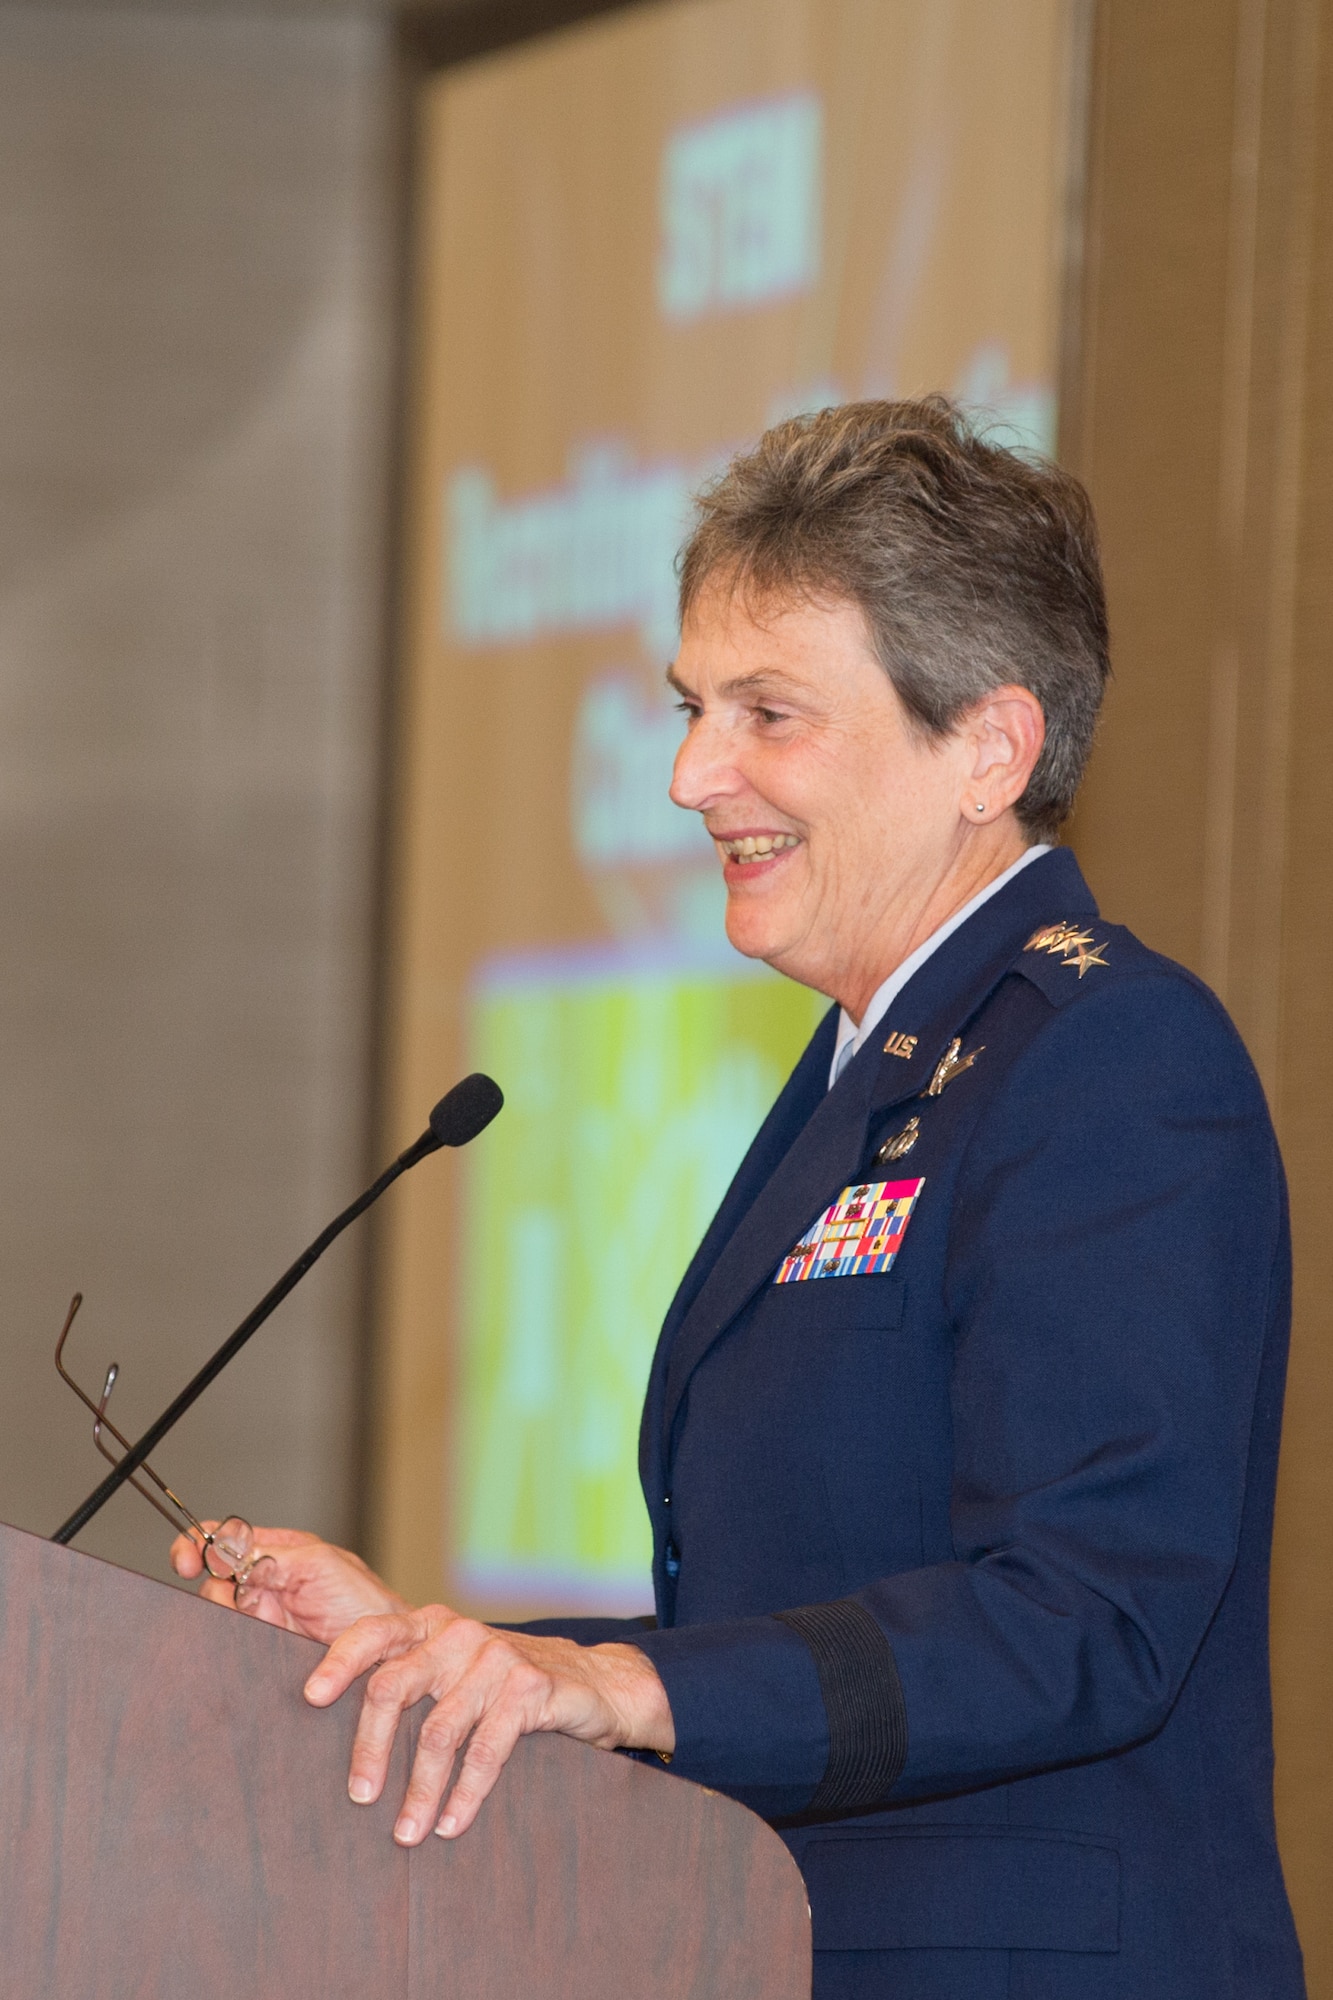 Gen. Ellen M. Pawlikowski, commander of Air Force
Materiel Command, delivers the keynote address at the 2016 Women in Science and Engineering Symposium at Patrick AFB, Fla., Sept. 7, 2016.  Pawlikowski was invited by the Air Force Technical Applications Center to address the 250-plus crowd to discuss diversity in the workplace, especially tailored to women in science, technology, engineering and math.  (U.S. Air Force photo by Ben Thacker)
